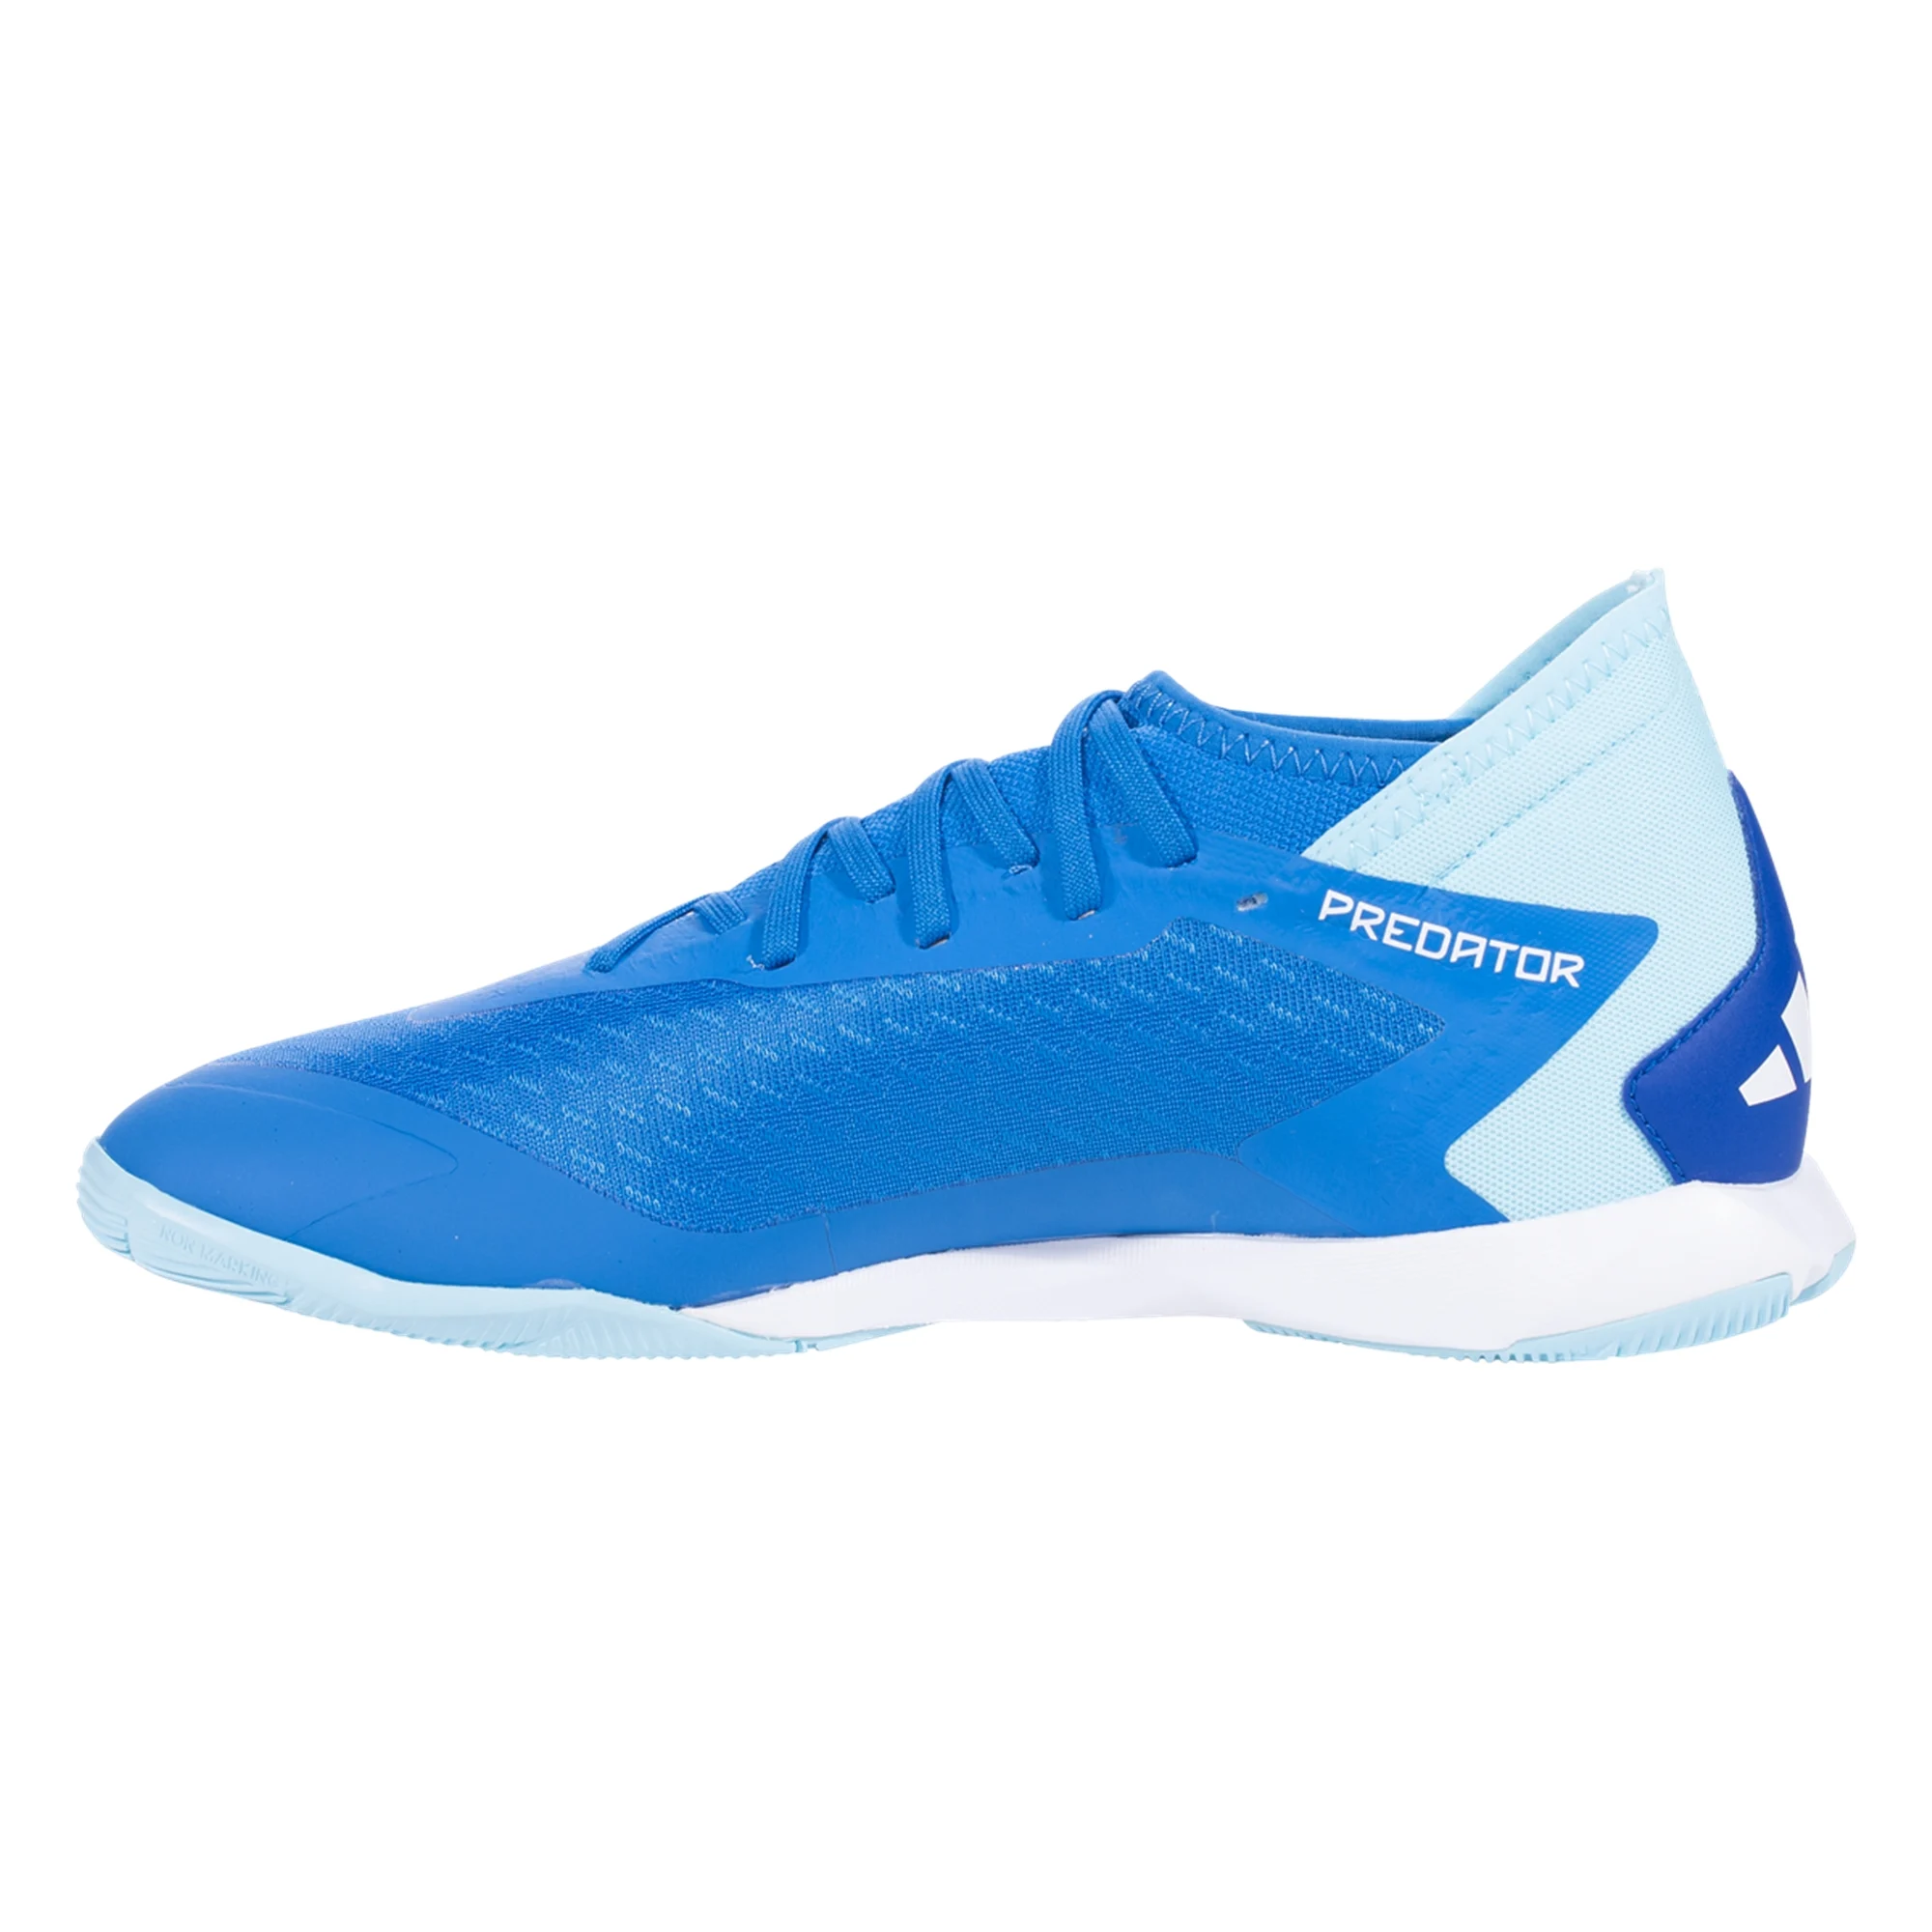 adidas Predator Accuracy.3 Indoor Soccer Shoes (Bright Royal/Bliss Blu -  Soccer Wearhouse